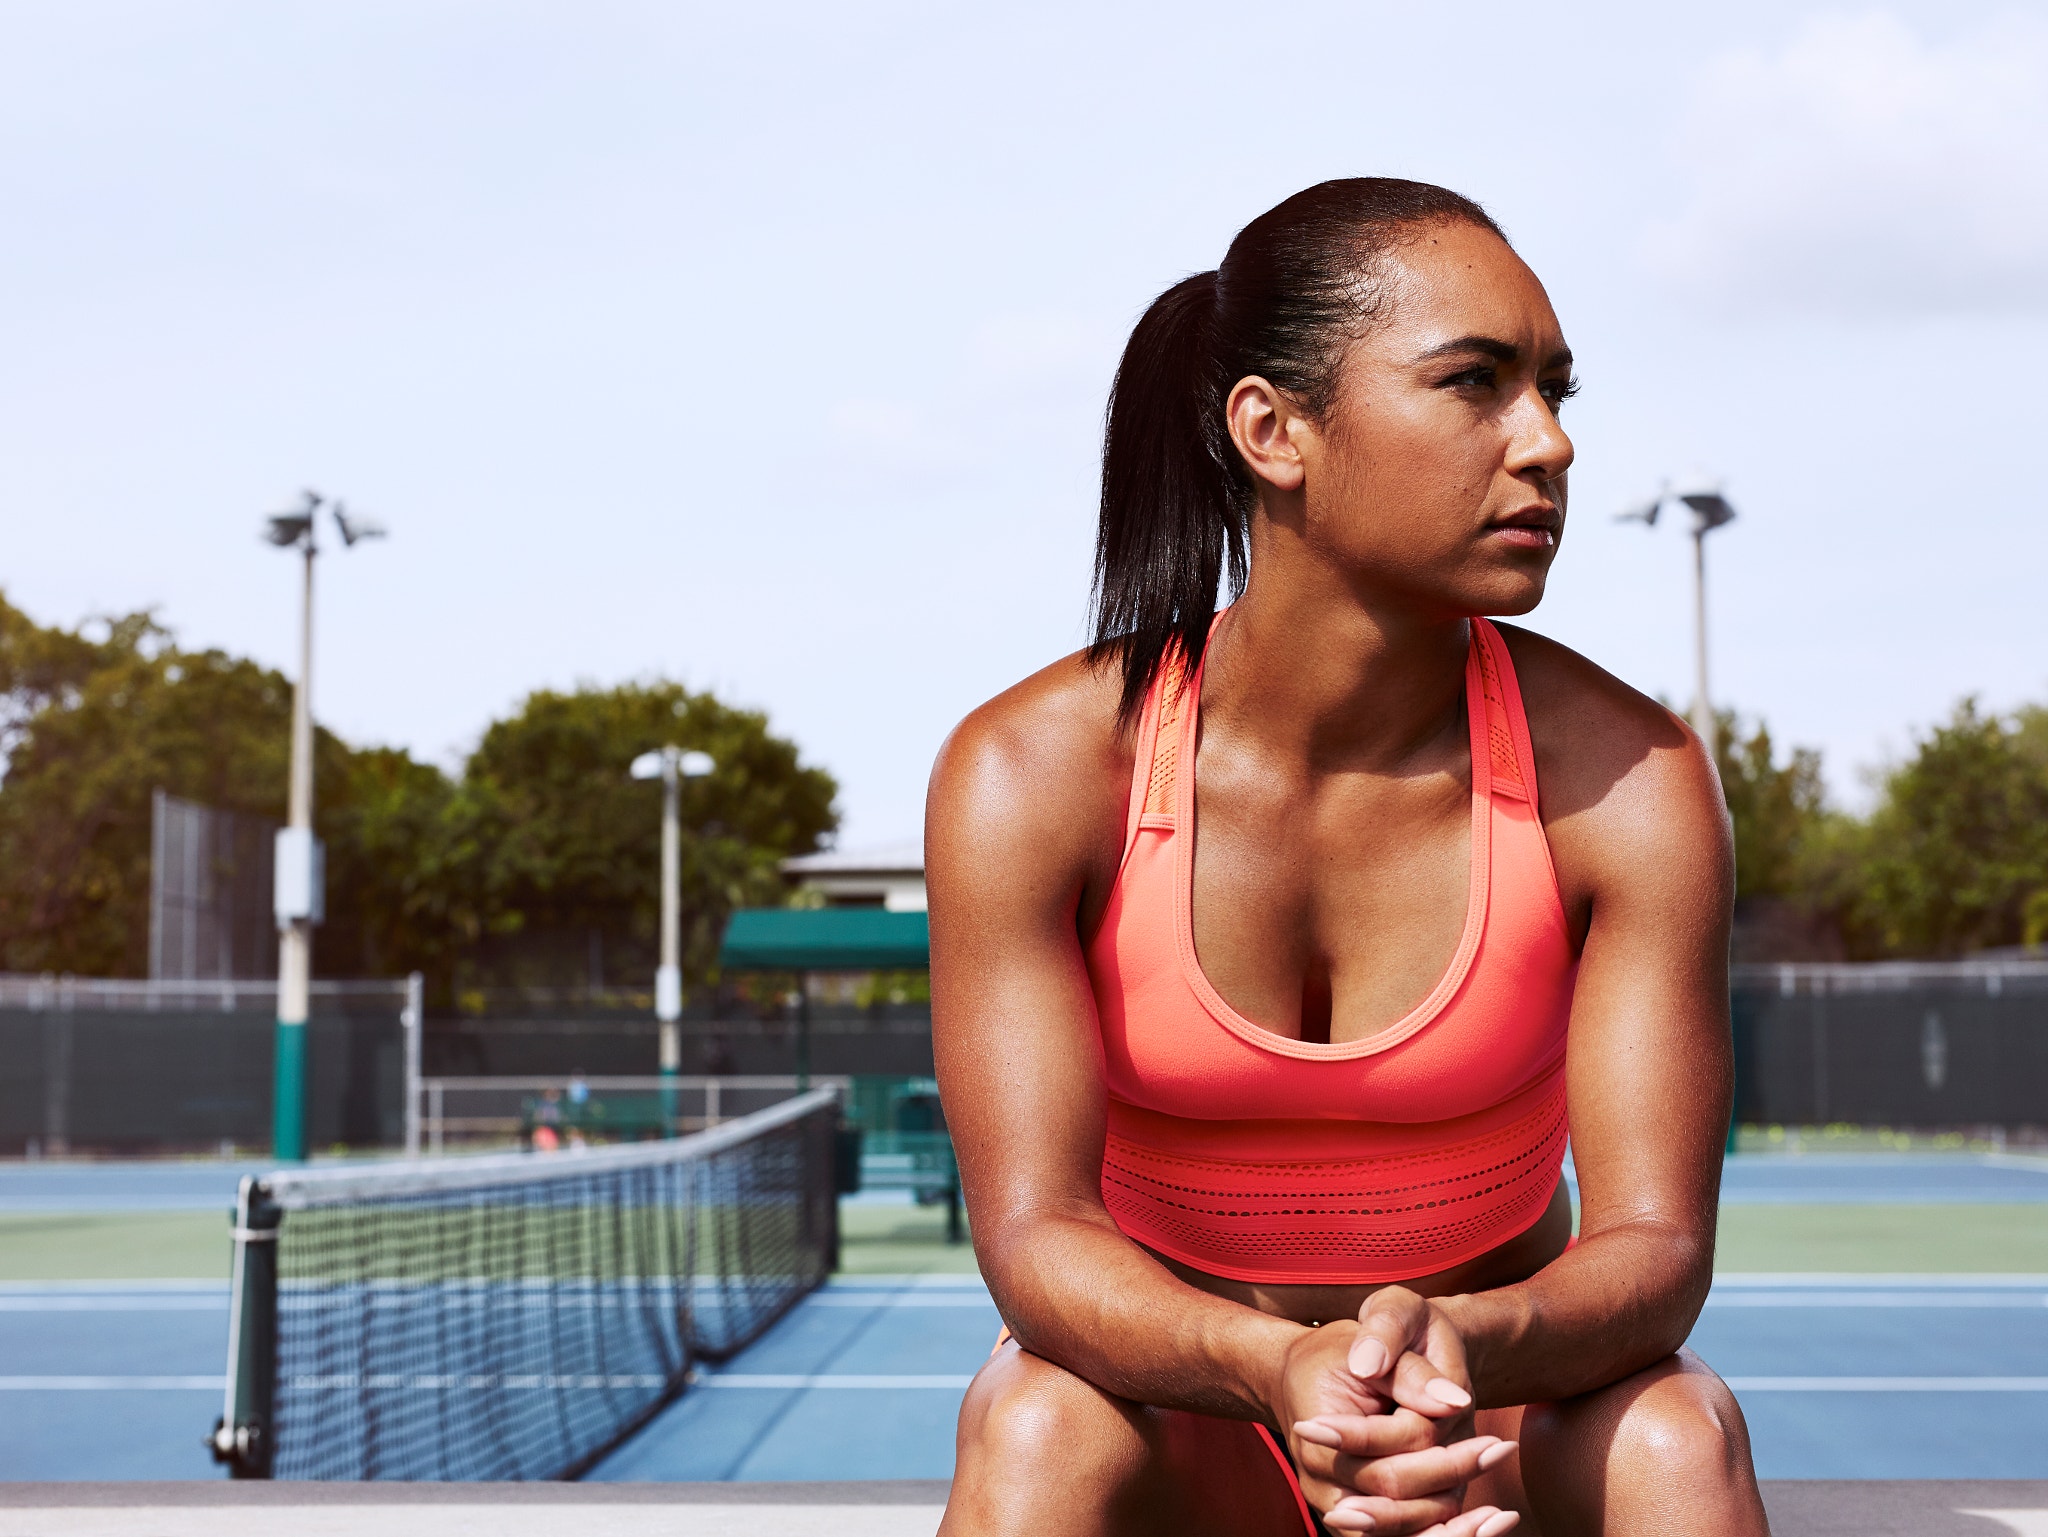  hours miami photographing pro tennis player heather watson 